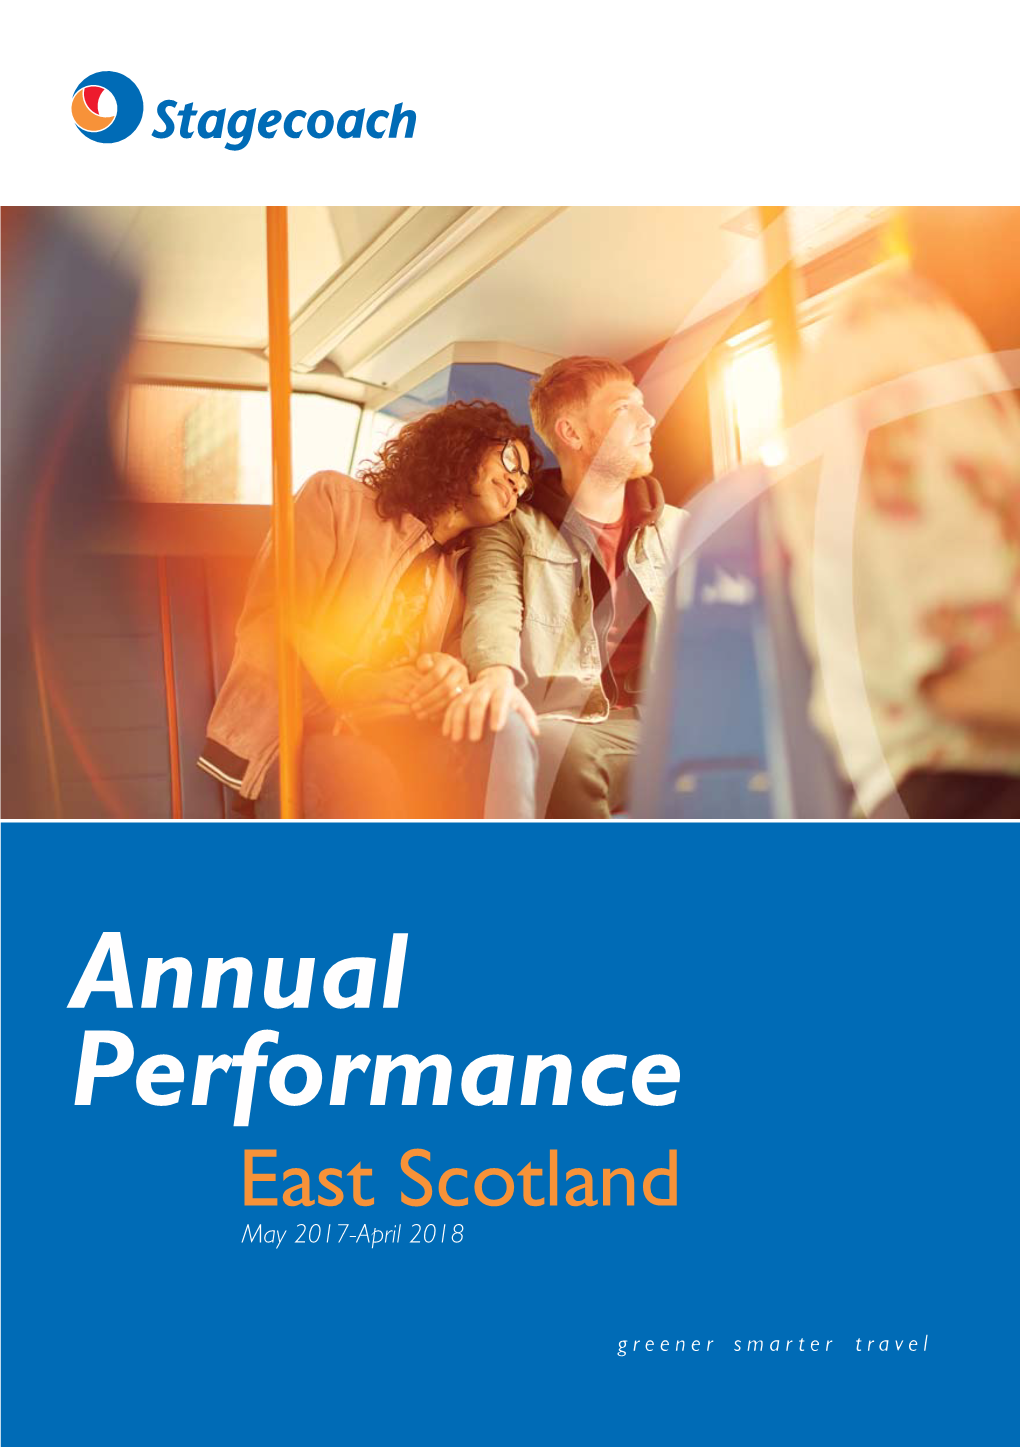 Annual Performance East Scotland May 2017-April 2018 Key Facts 32 Million Passenger Journeys Were Made on Stagecoach East Scotland Buses